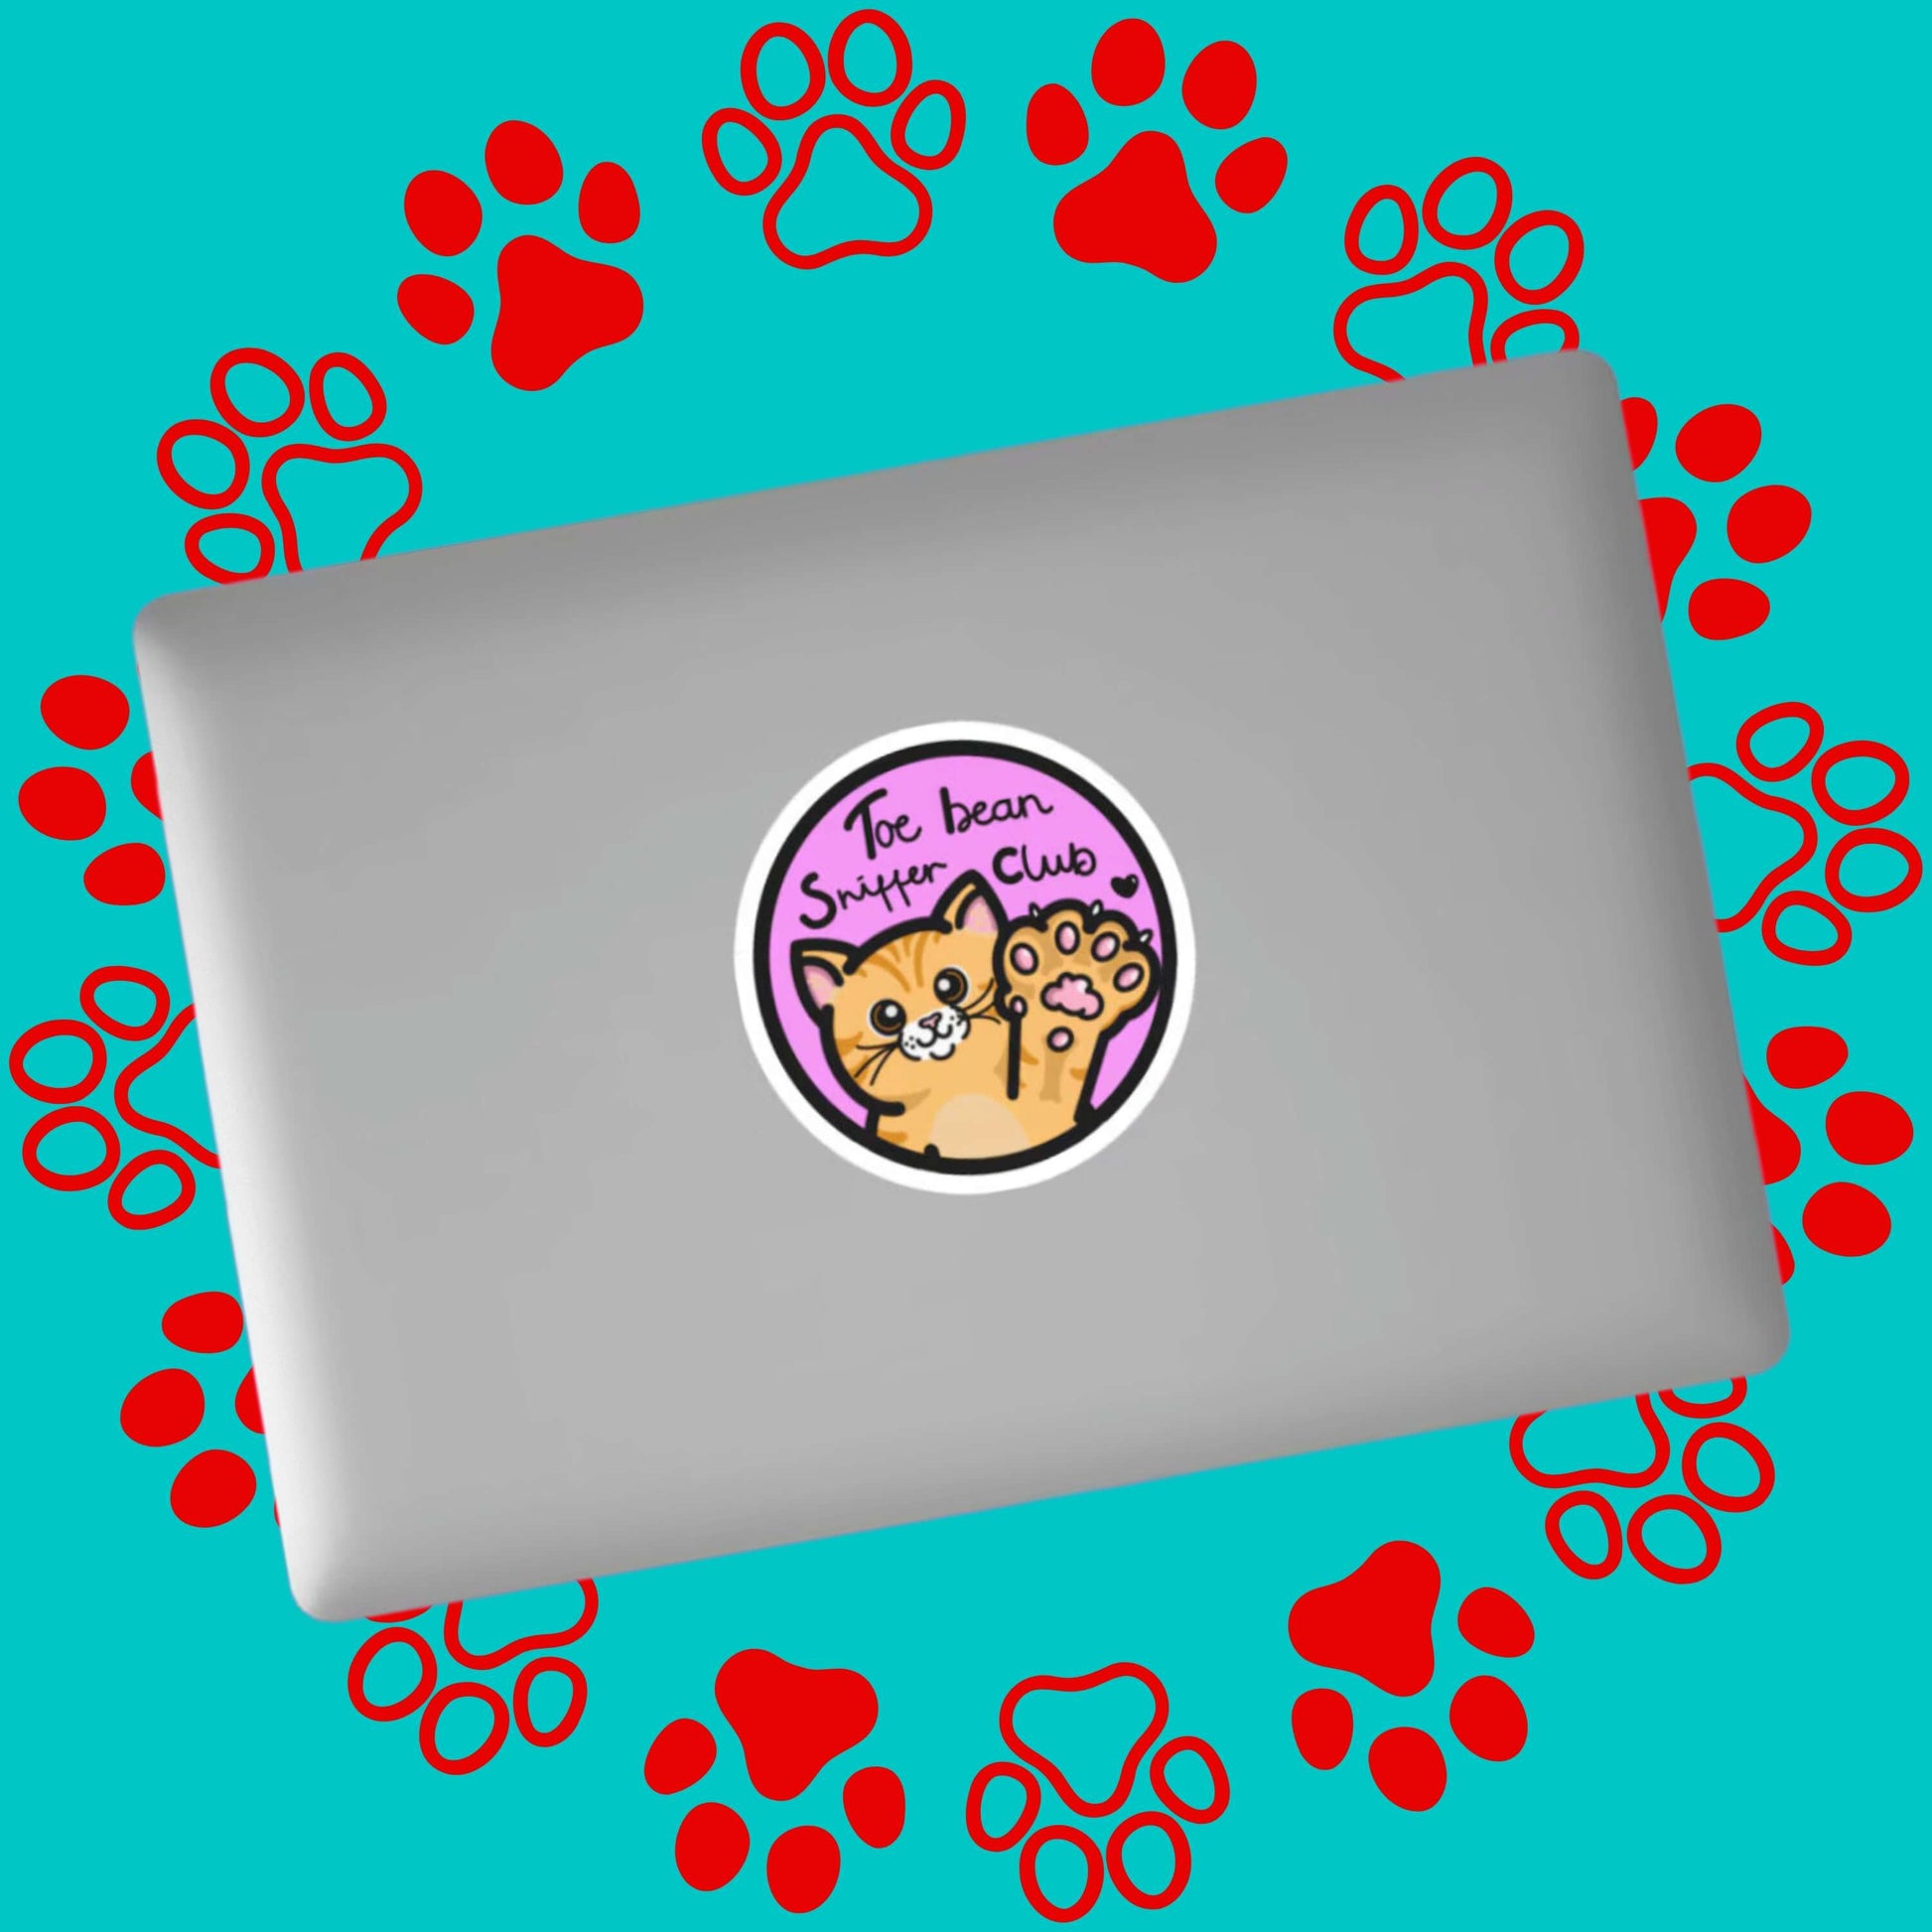 The Toe Bean Sniffer Club Sticker stuck on a silver laptop on a red and blue paw print background. The pastel pink circular sticker has a black outline and black text reading 'toe bean sniffer club' with a smiling orange cat raising a paw with a black heart.